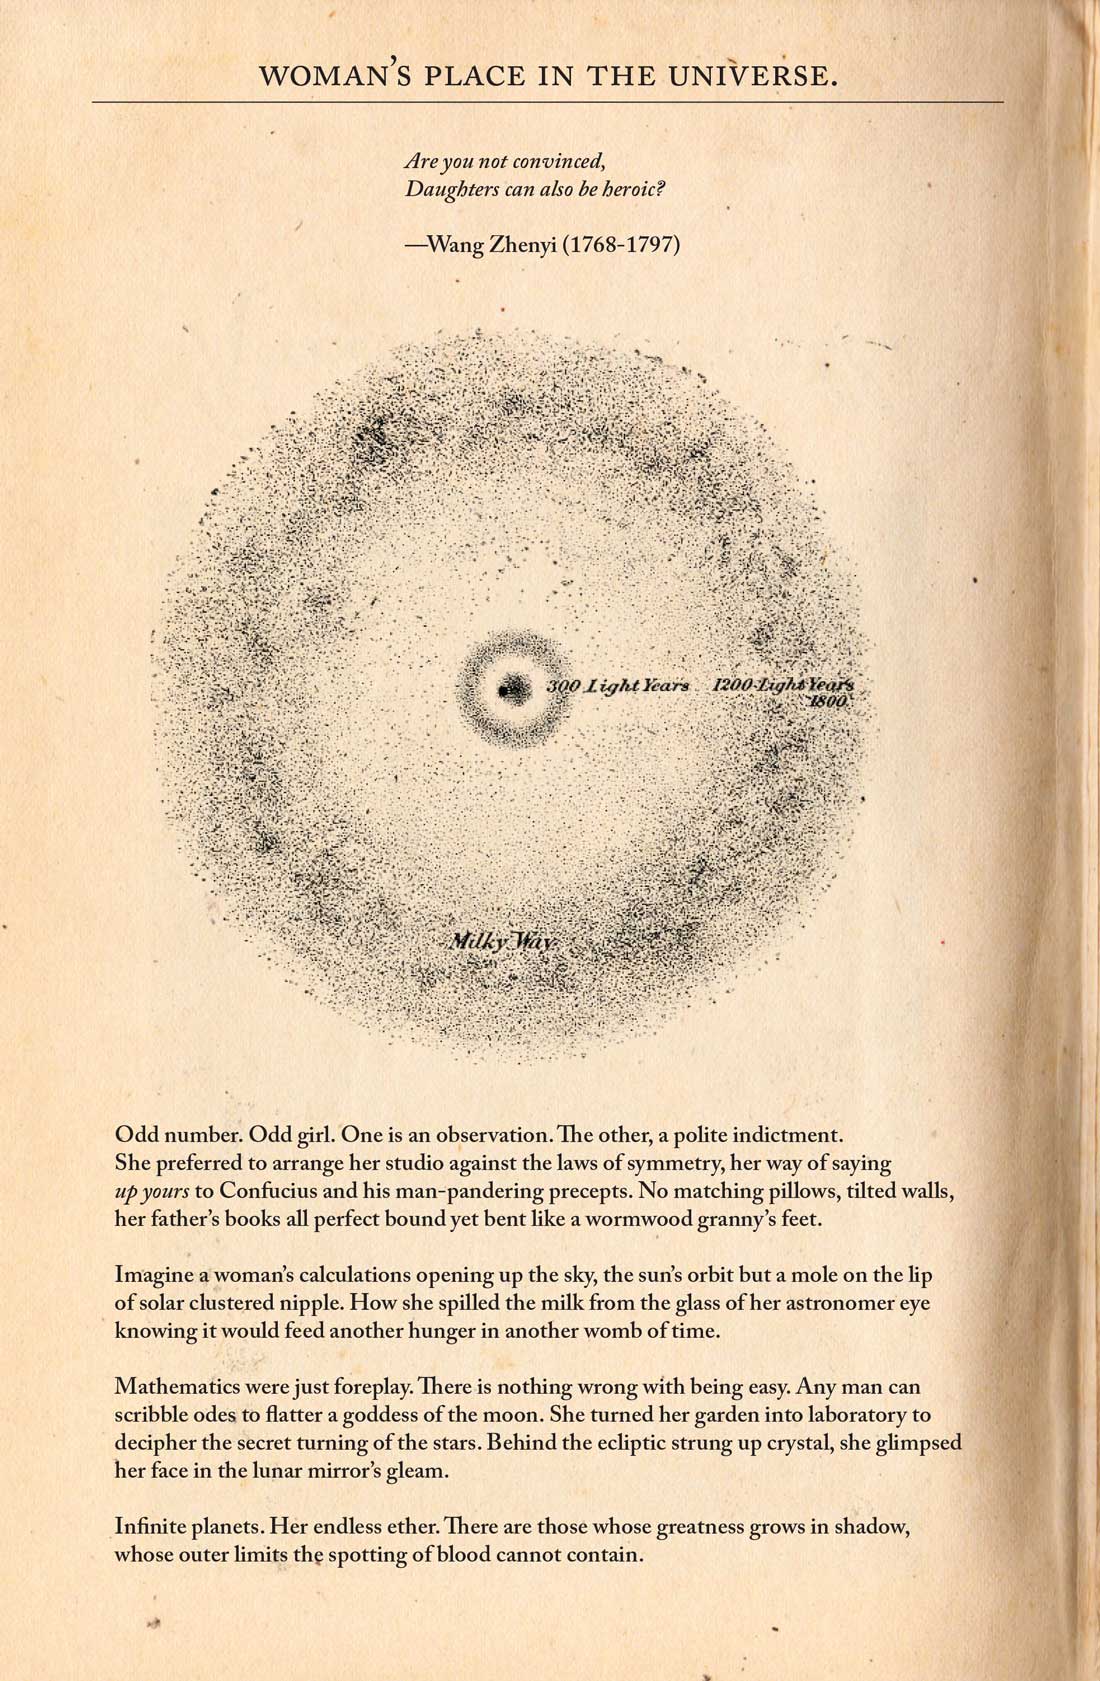 Image: a scanned page from a book. The top reads: Woman’s Place in the Universe. Are you not convinced Daughters can also be heroic? — Wang Zhenyi (1768–1797) Underneath is a drawing of the Milky Way. Underneath are four paragraphs, which read: Odd number. Odd girl. One is an observation. The other, a polite indictment. She preferred to arrange her studio against the laws of symmetry, her way of saying up yours to Confucius and his man-pandering precepts. No matching pillows, tilted walls, her father’s books all perfect bound yet bent like a wormwood granny’s feet. 

Imagine a woman’s calculations opening up the sky, the sun’s orbit but a mole on the lip of a solar clustered nipple. How she spilled milk from the glass of her astronomer eye knowing it would feed another hunger in another womb of time. 

Mathematics were just foreplay. There is nothing wrong with being easy. Any man can scribble odes to flatter a goddess of the moon. She turned her garden into a laboratory to decipher the secret turning of the stars. Behind the ecliptic strung up crystal, she glimpsed her face in the lunar gleam. 

Infinite planets.Her endless ether. There are those whose greatness grows in shadow, whose outer limits the spotting of blood cannot contain. 